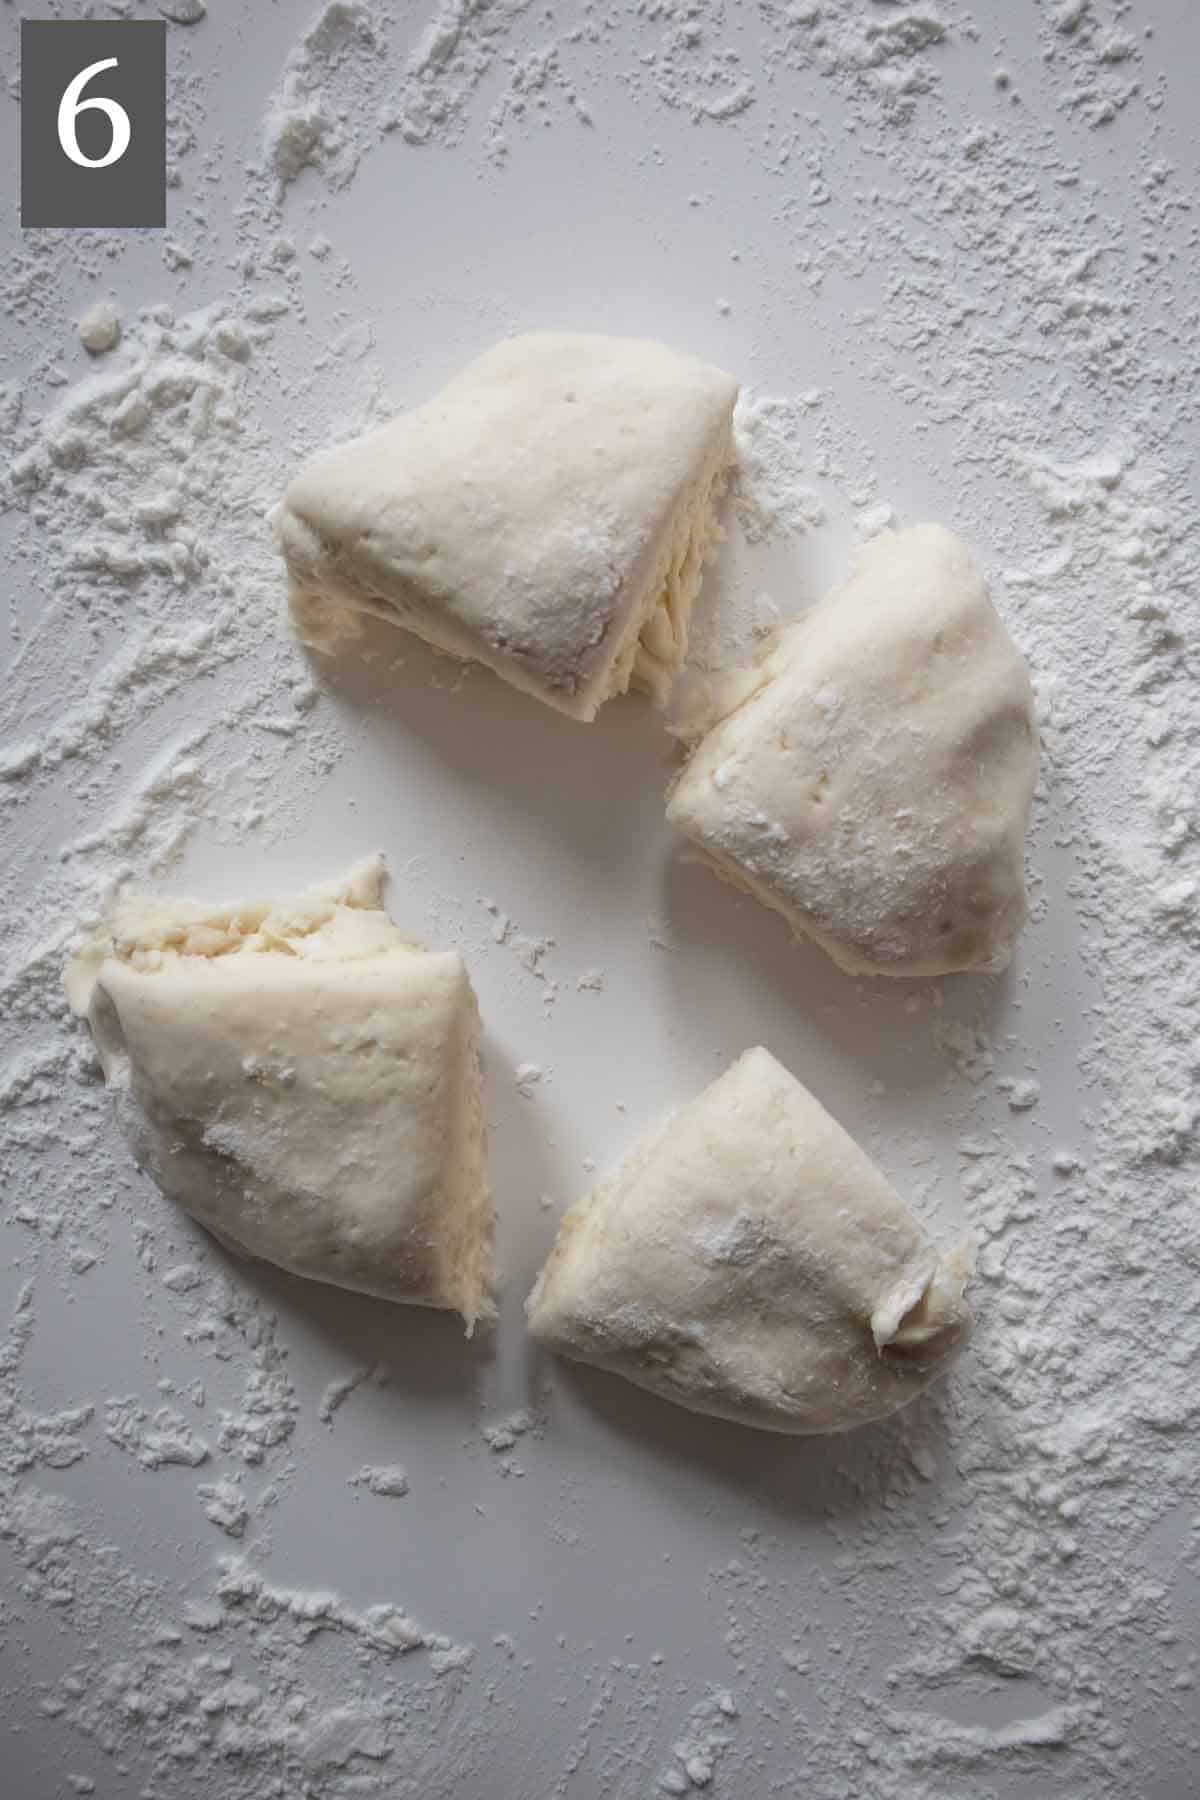 Dough divided in 4 pieces.